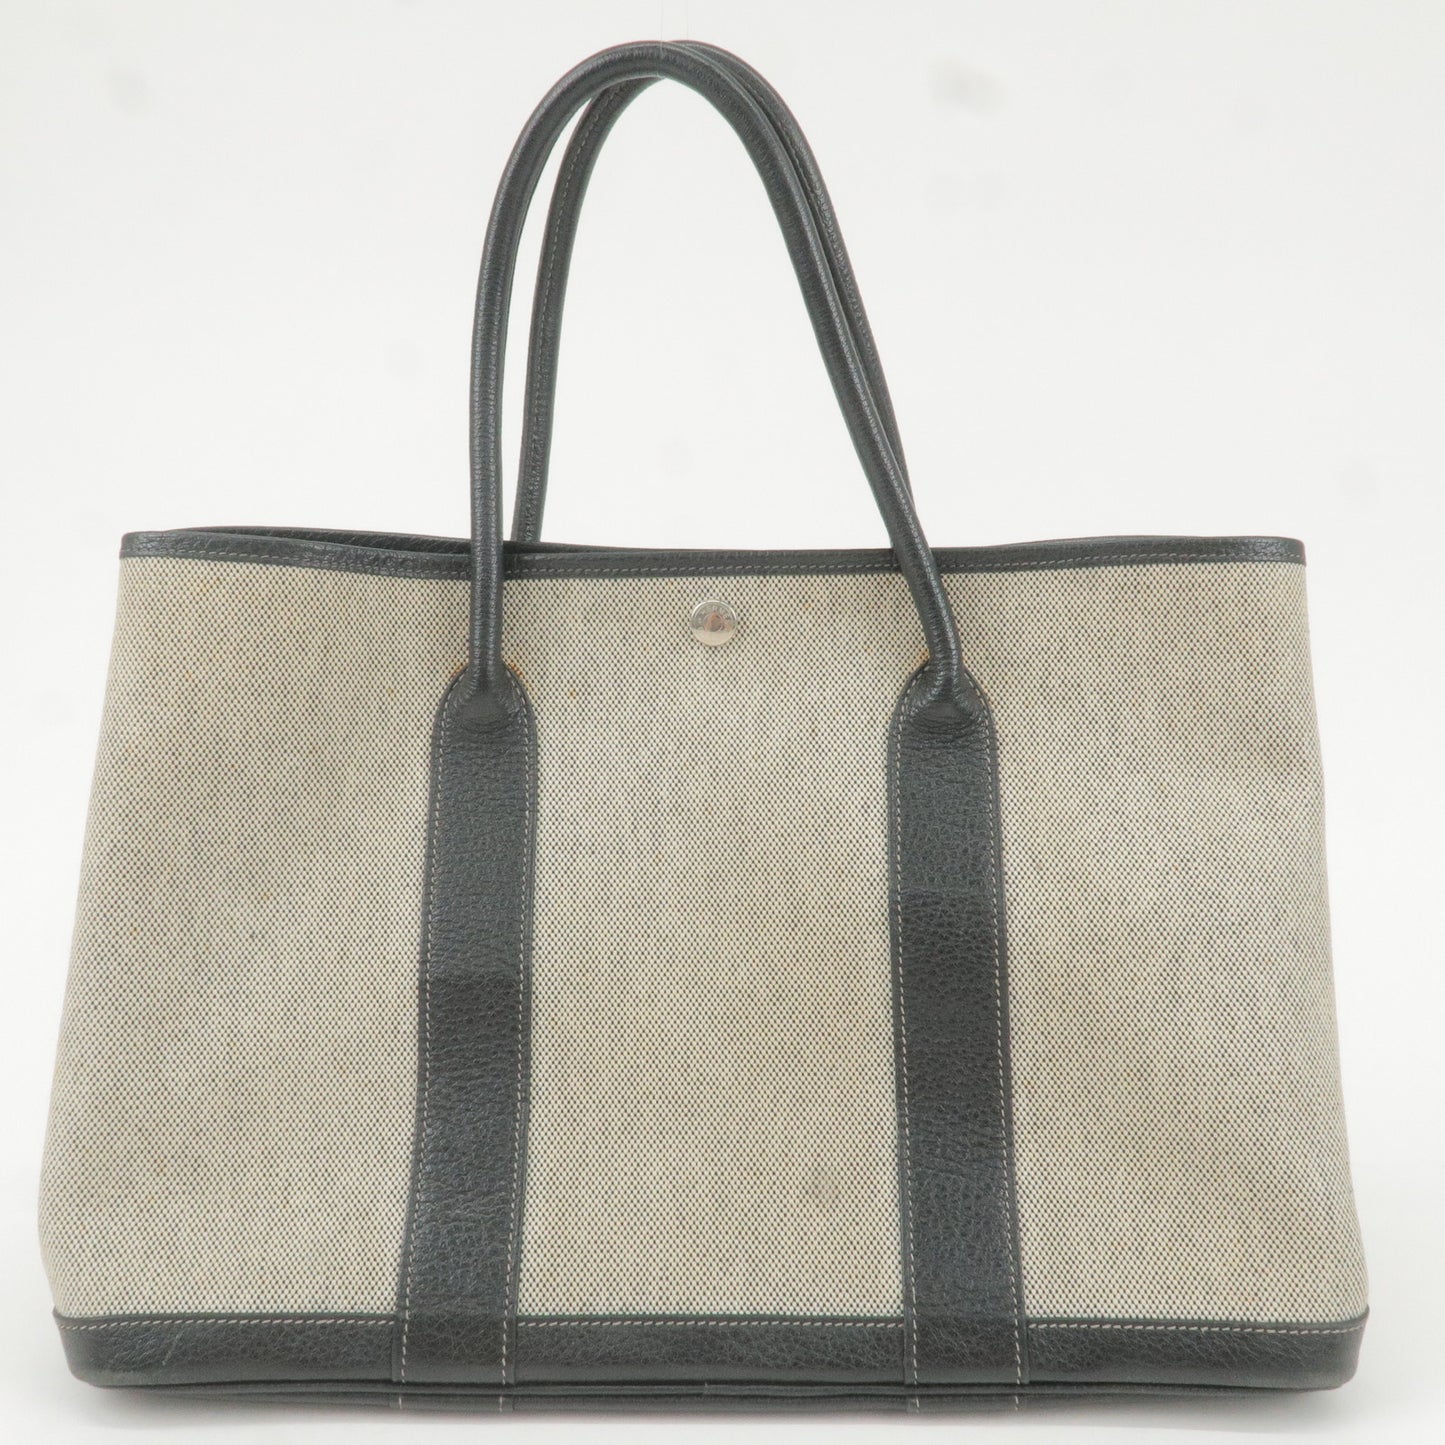 HERMES Garden Party PM Toile Ash Leather Tote Bag Gray Black